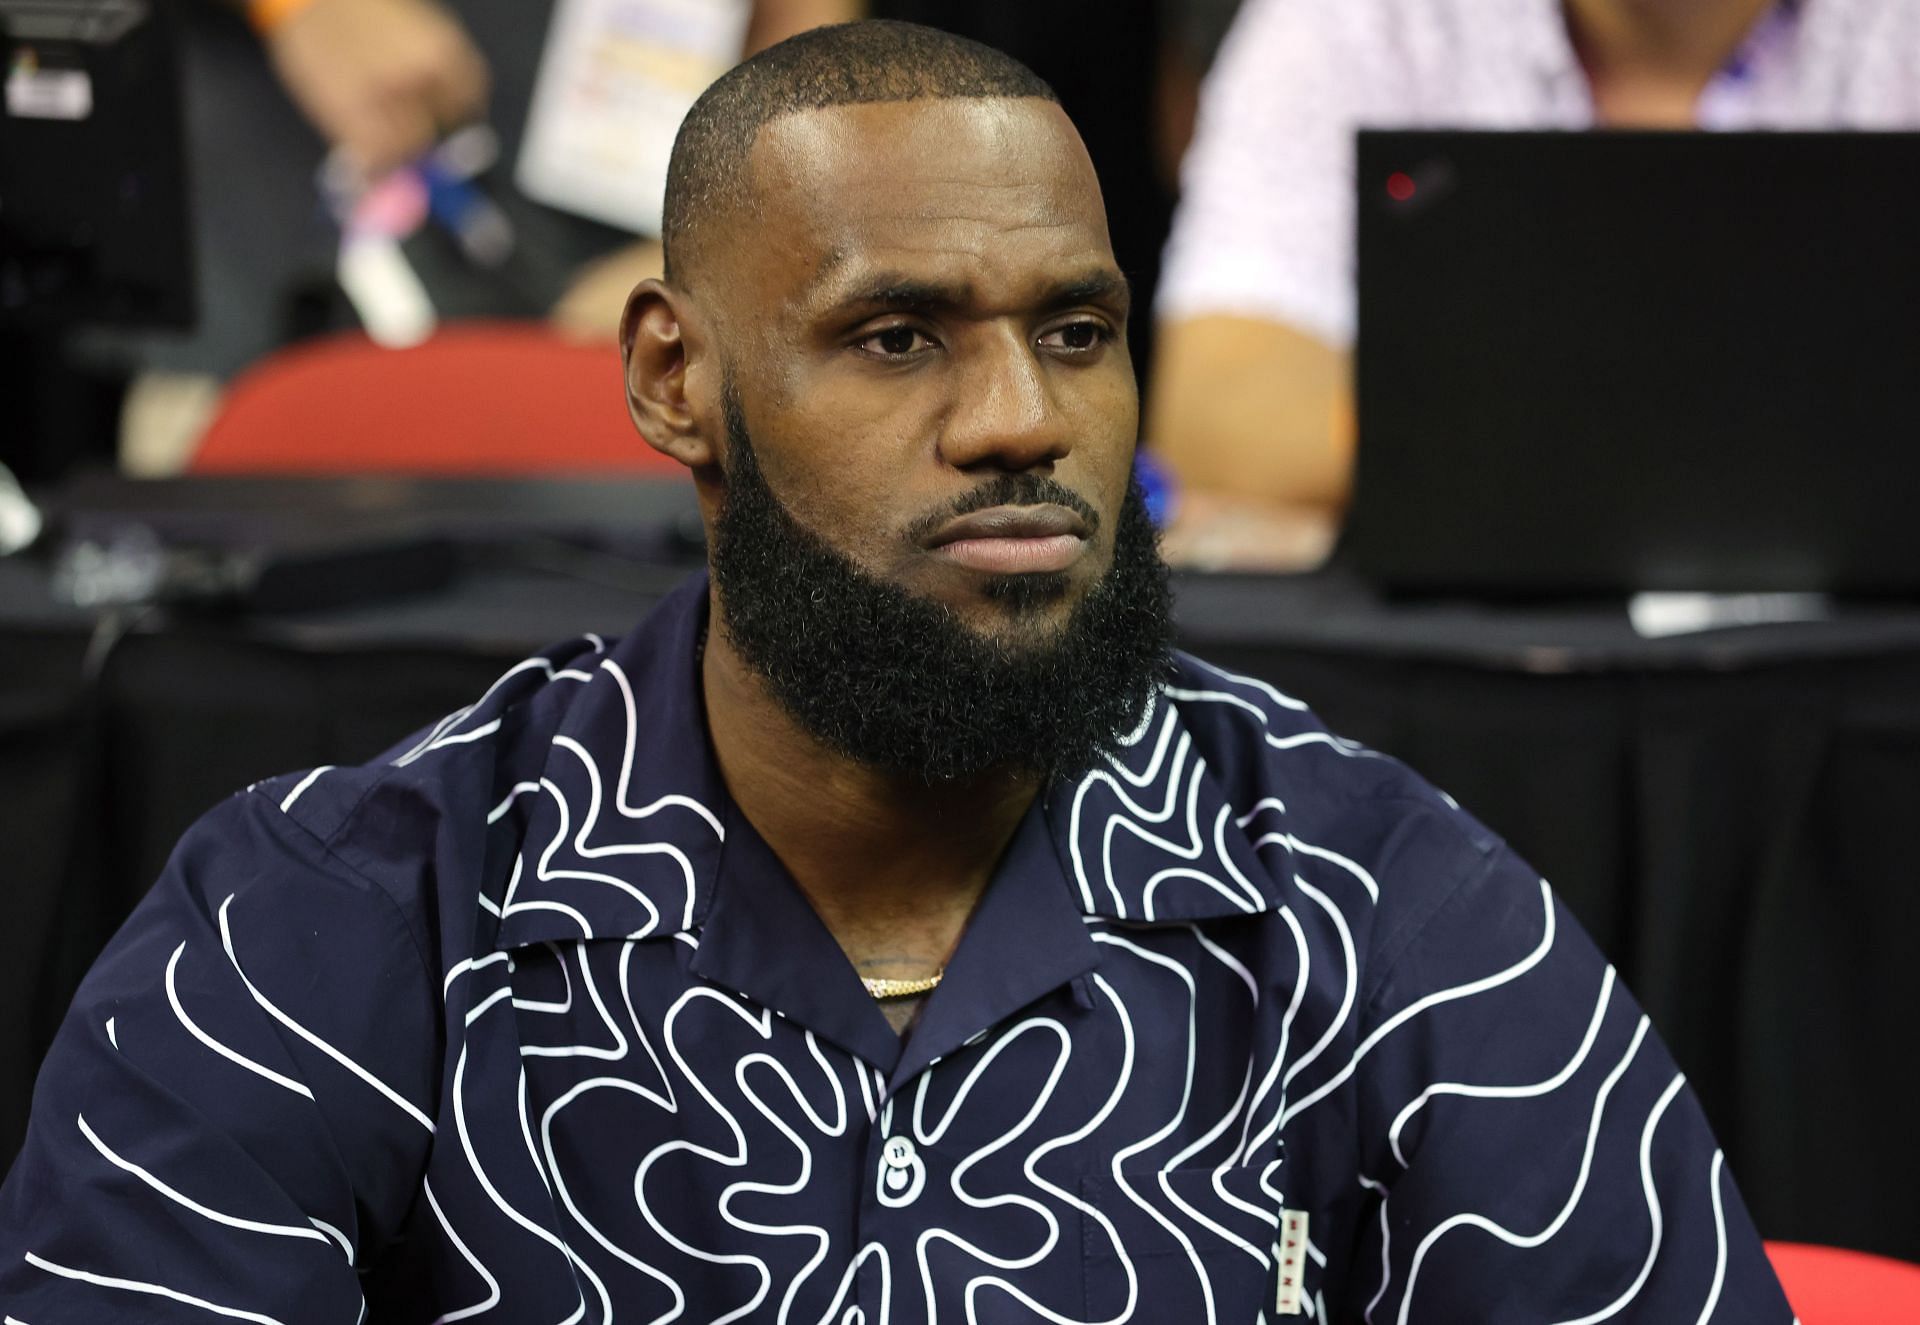 LeBron James of the LA Lakers attends a game during the 2022 NBA Summer League